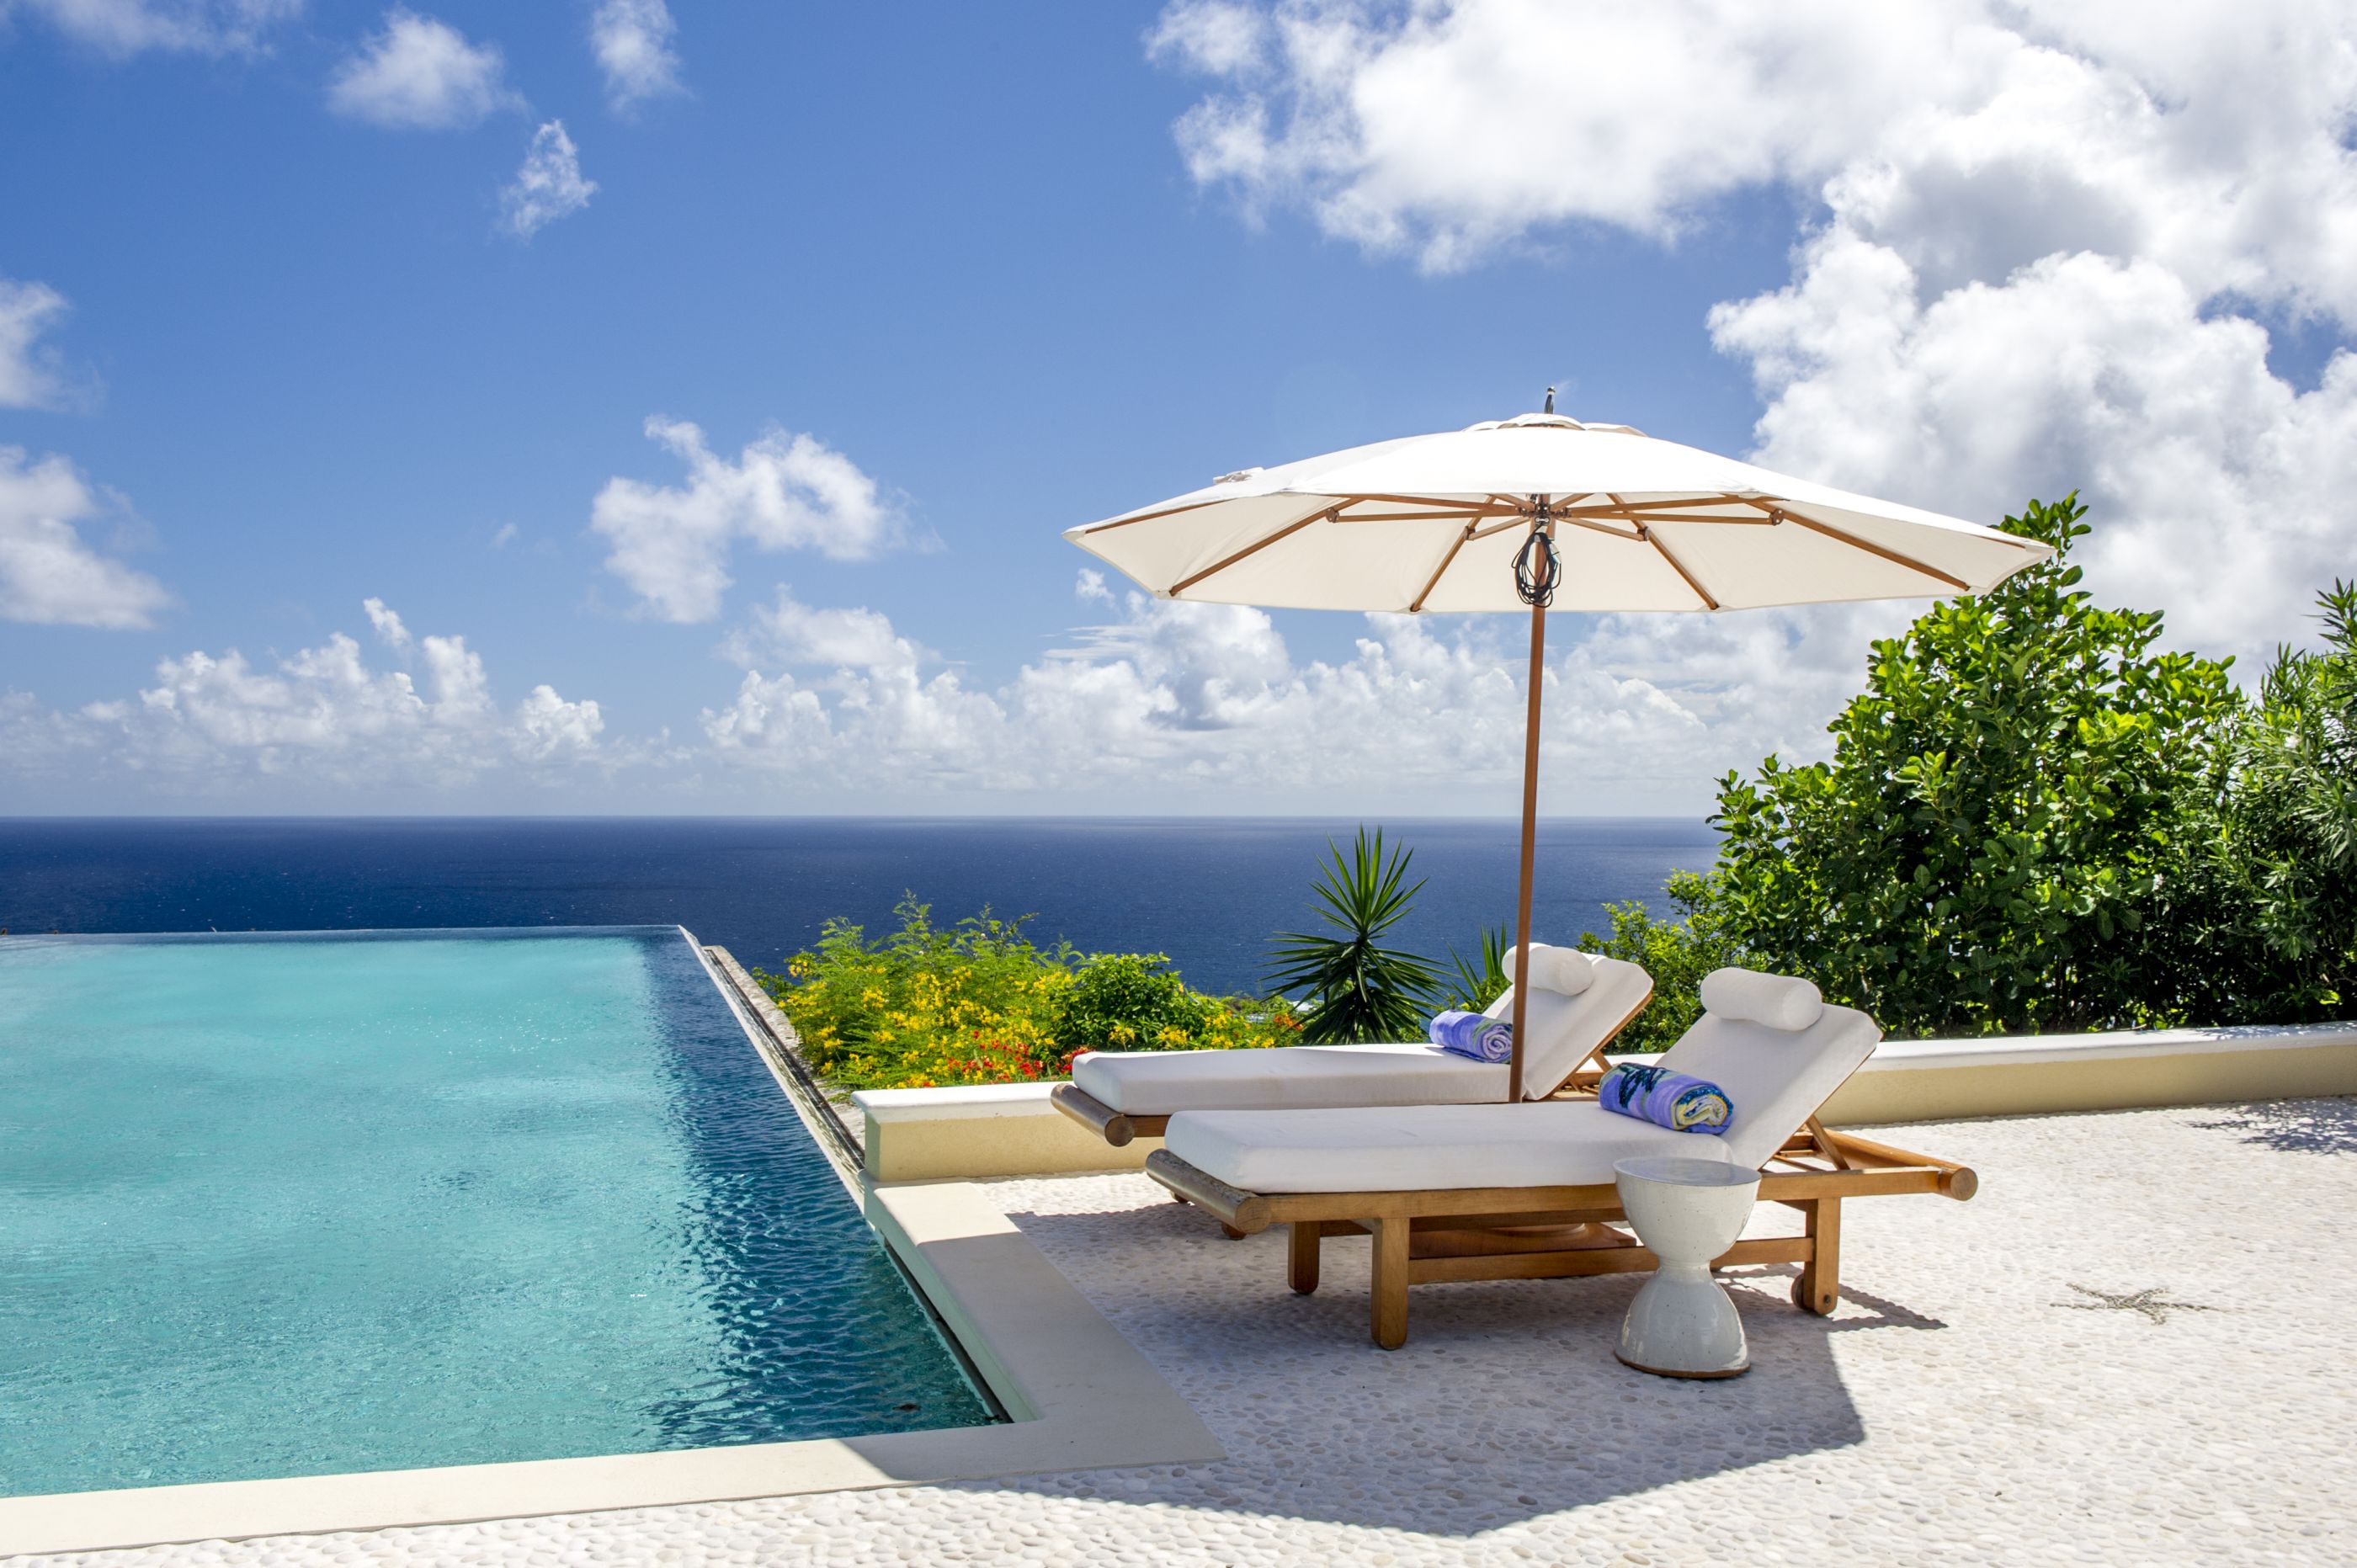 Sunbeds at the swimming pool of Ocean Breeze, Mustique